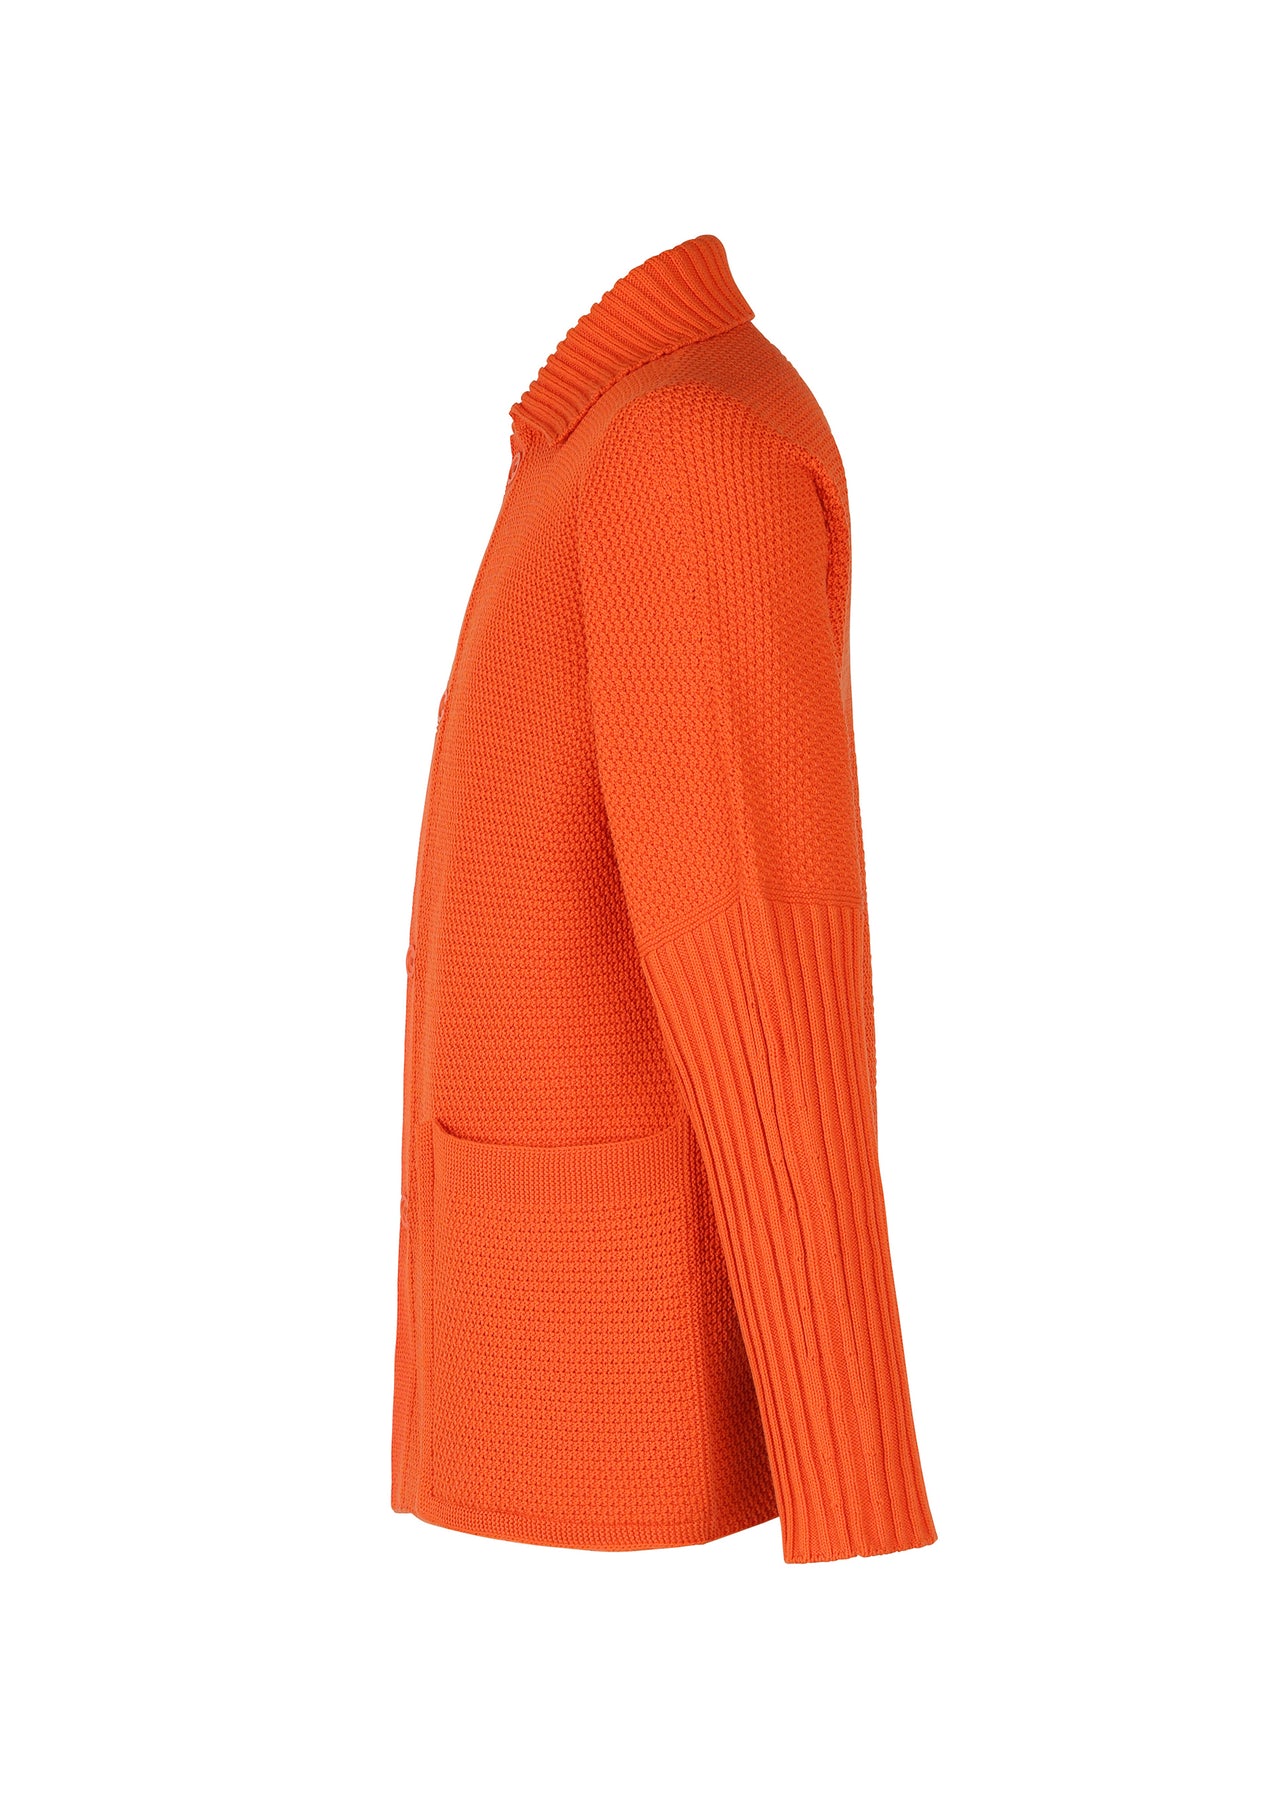 RUSTIC KNIT CARDIGAN | The official ISSEY MIYAKE ONLINE STORE